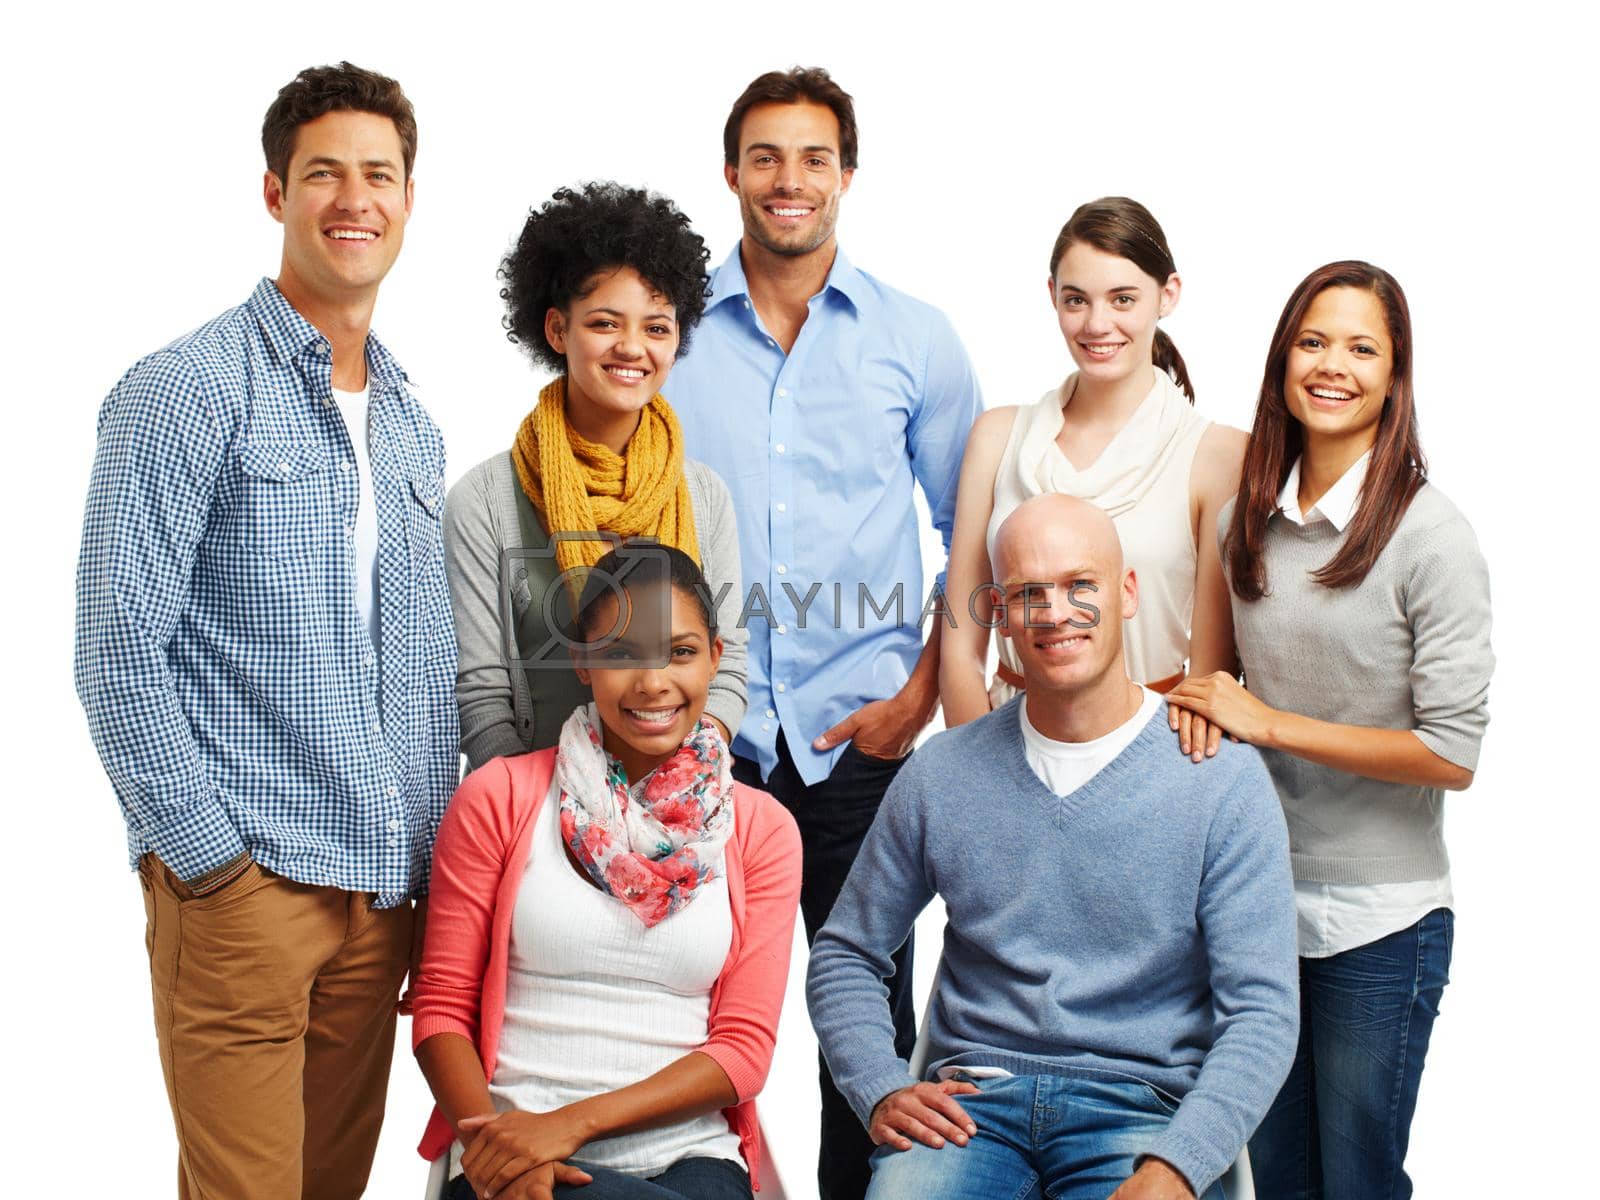 Royalty free image of Theyre a positive bunch. Smiling group of casual young adults together against a white background. by YuriArcurs